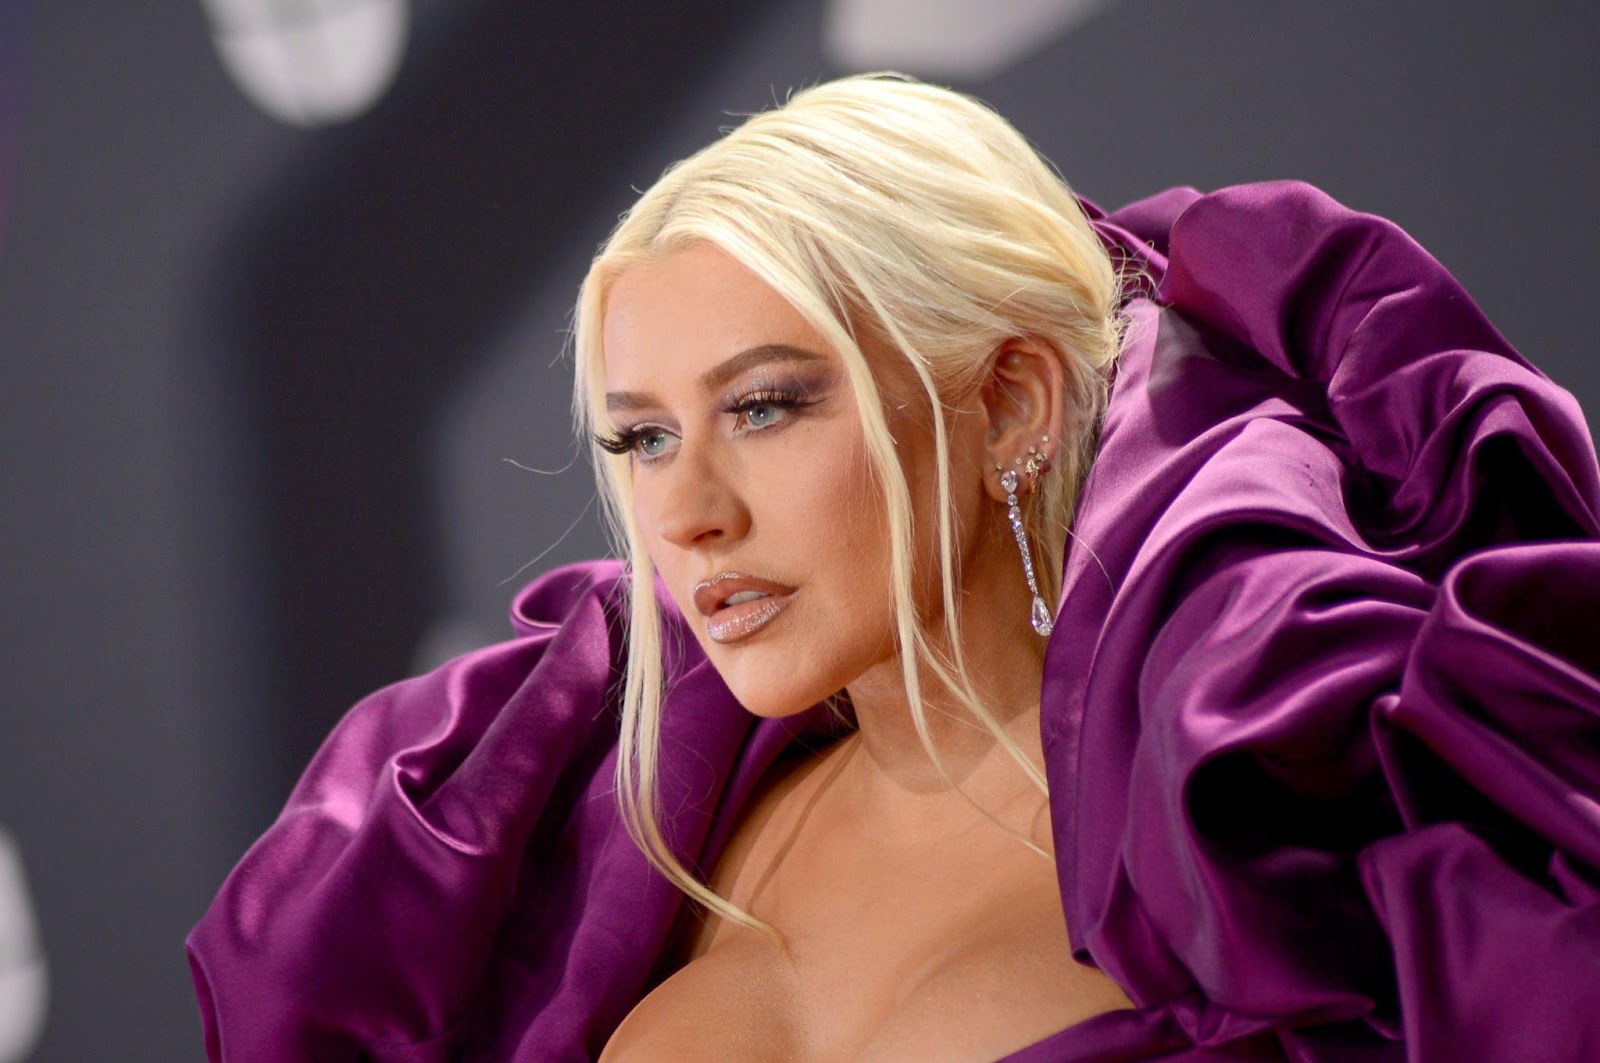 Christina Aguilera In Purple Gown With Dramatic Ruffled Collar & Invisible Heels at Latin Grammy Awards 2022